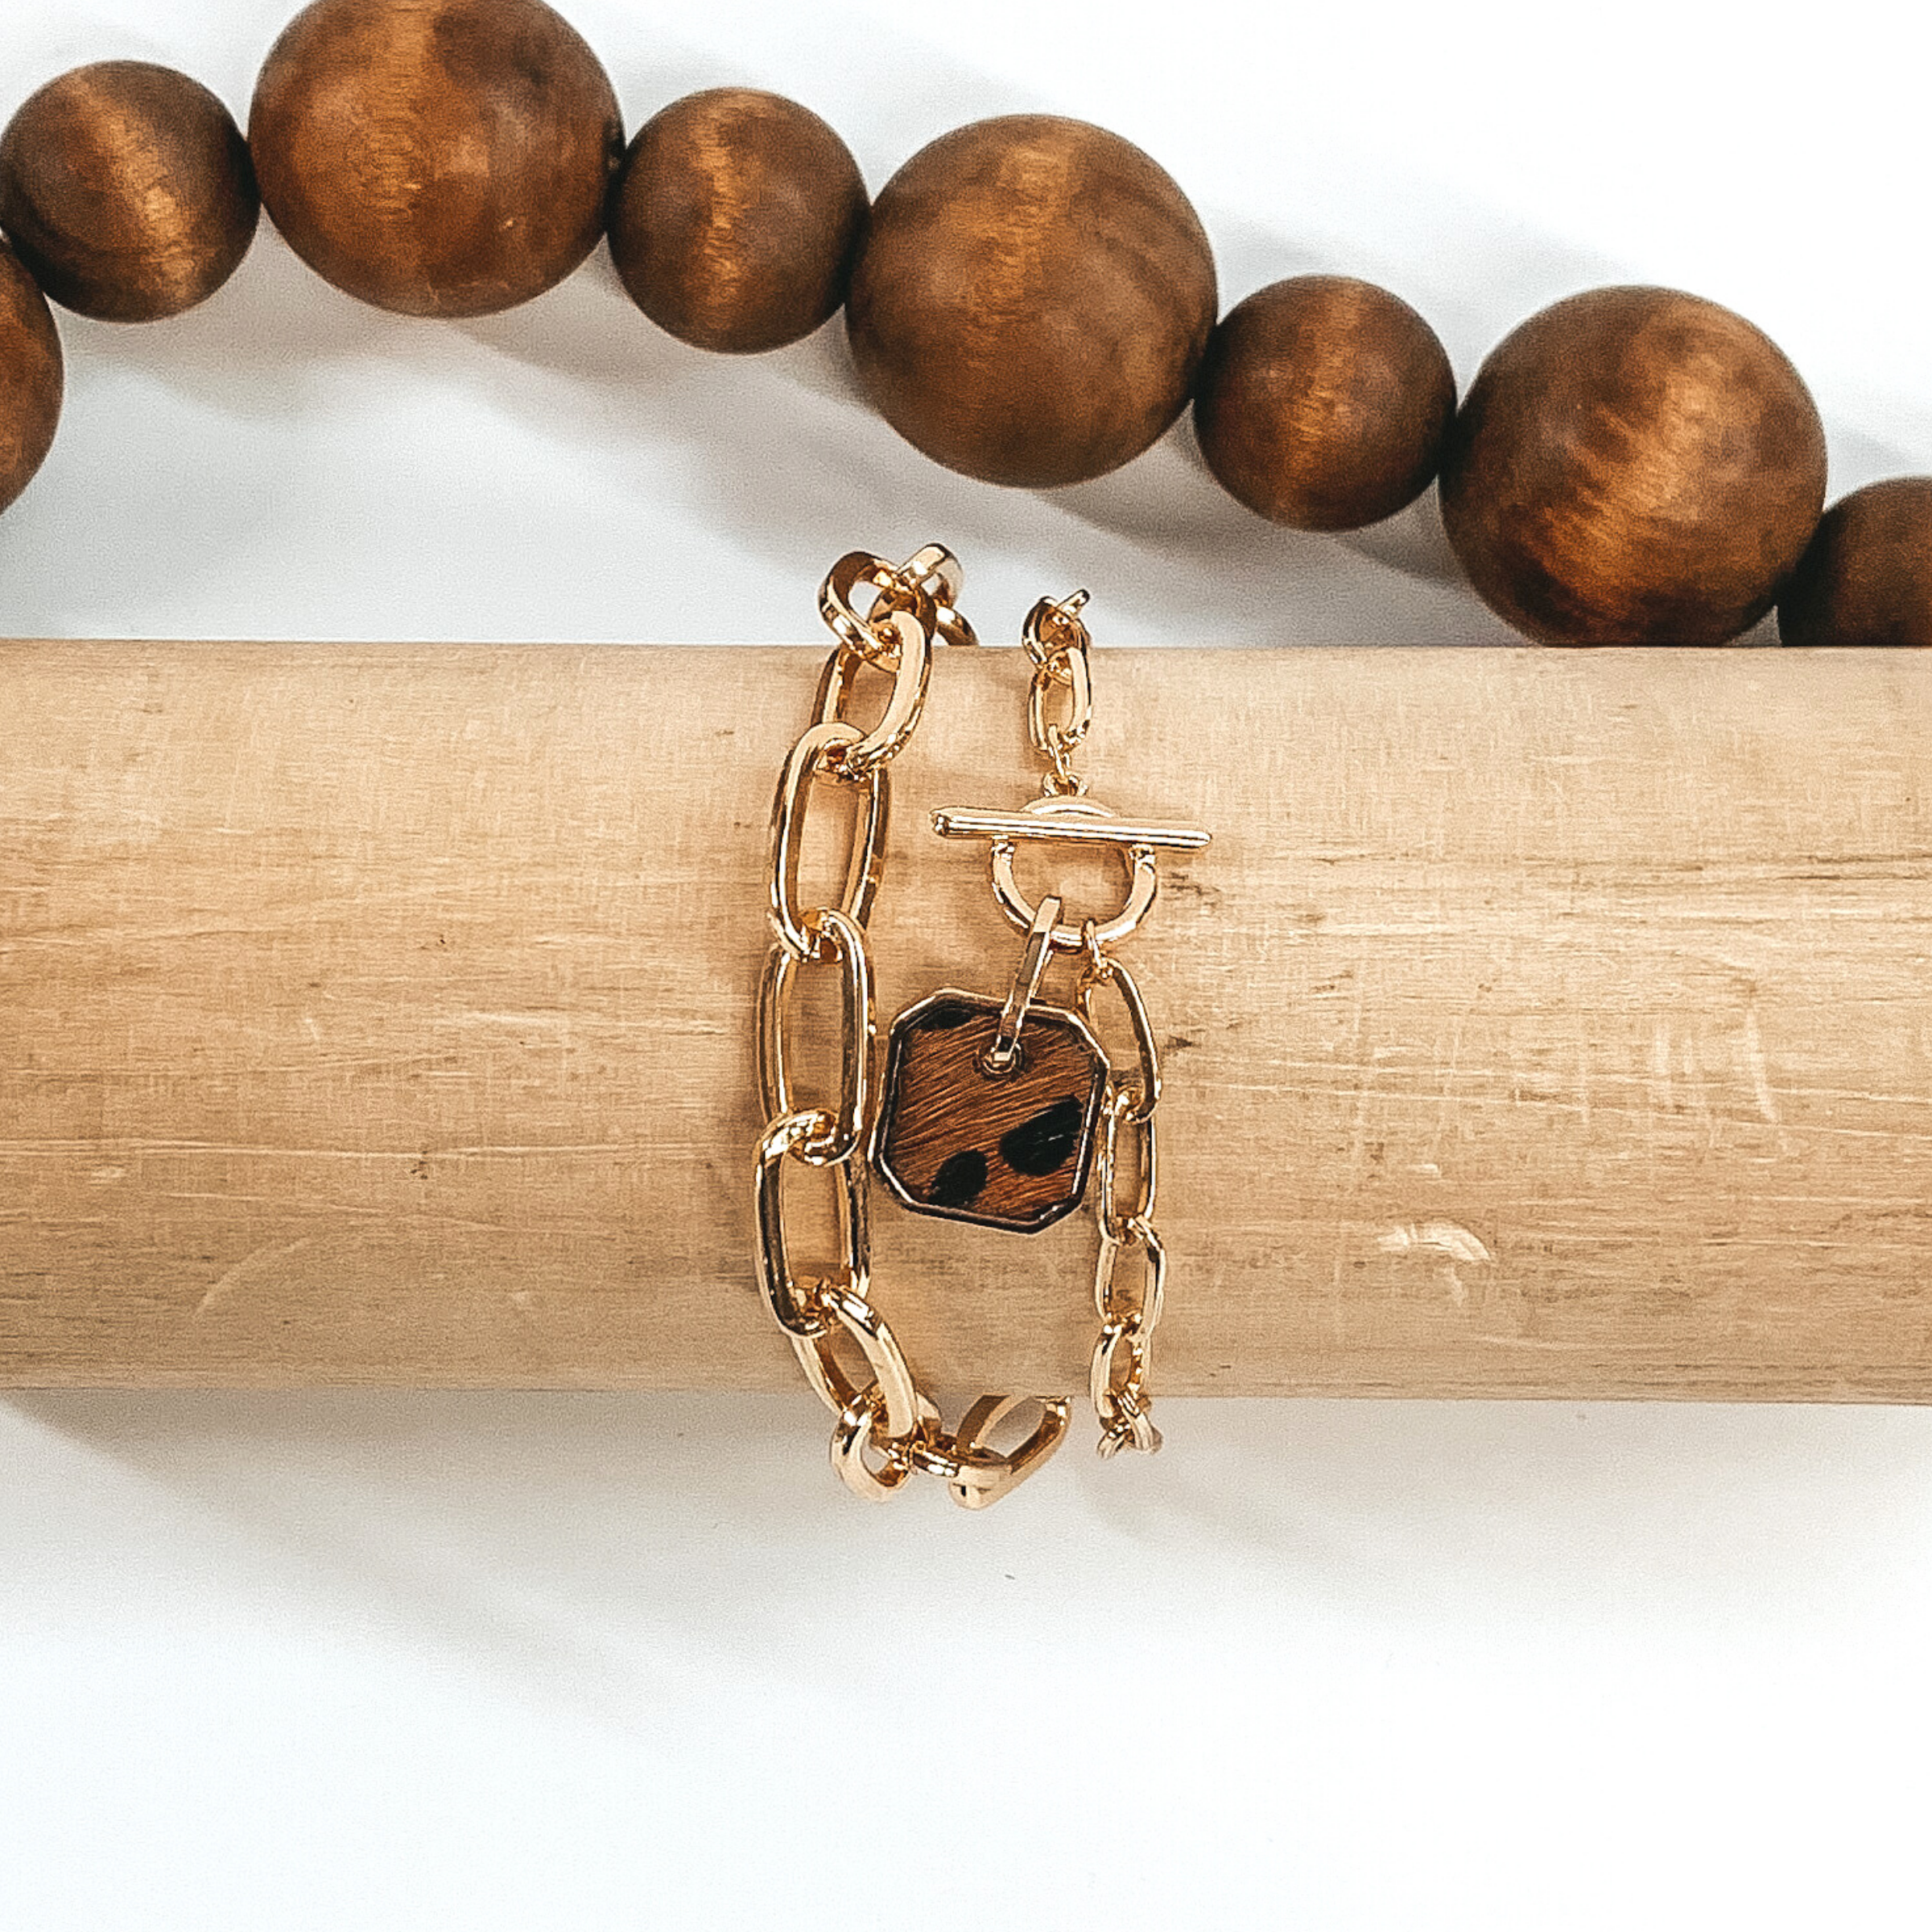 Gold two chained bracelet with an octagon pendant with a brown hide inlay with a black animal print. This bracelet is pictured on a light tan bracelet holder on a white background with brown beads in the background.